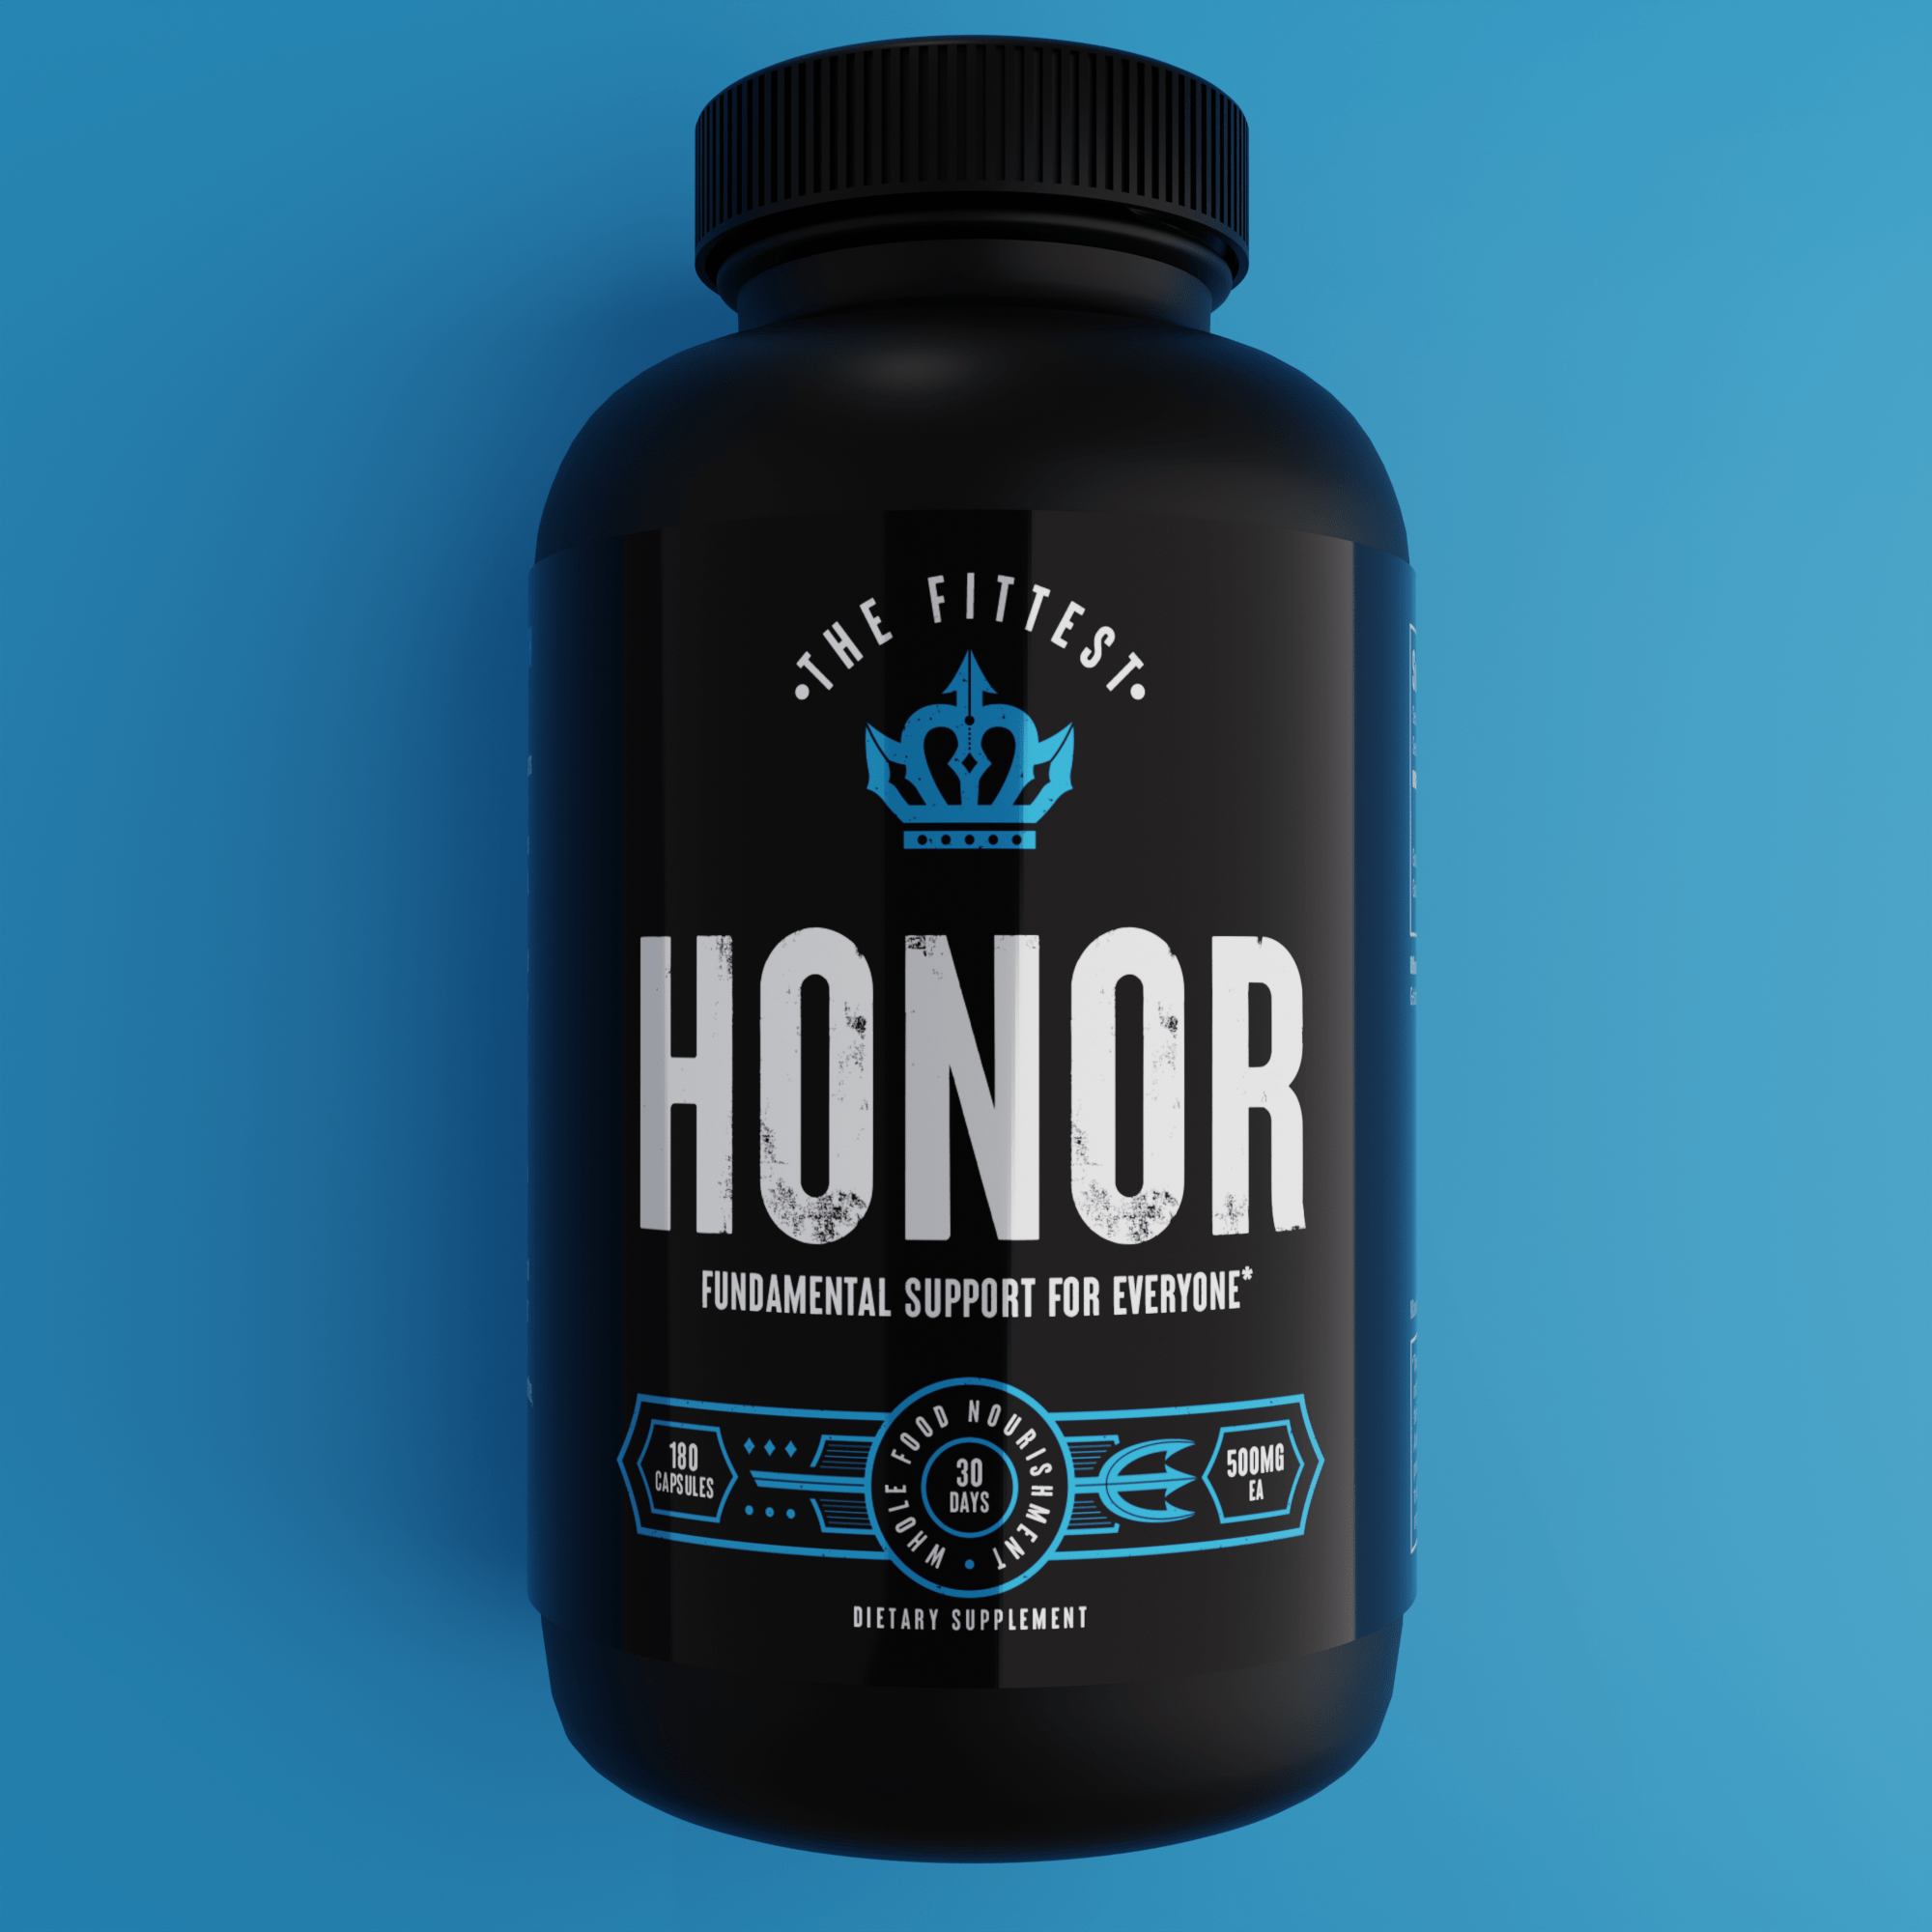 Bottle of Honor showing the front label in front of a vibrant blue background